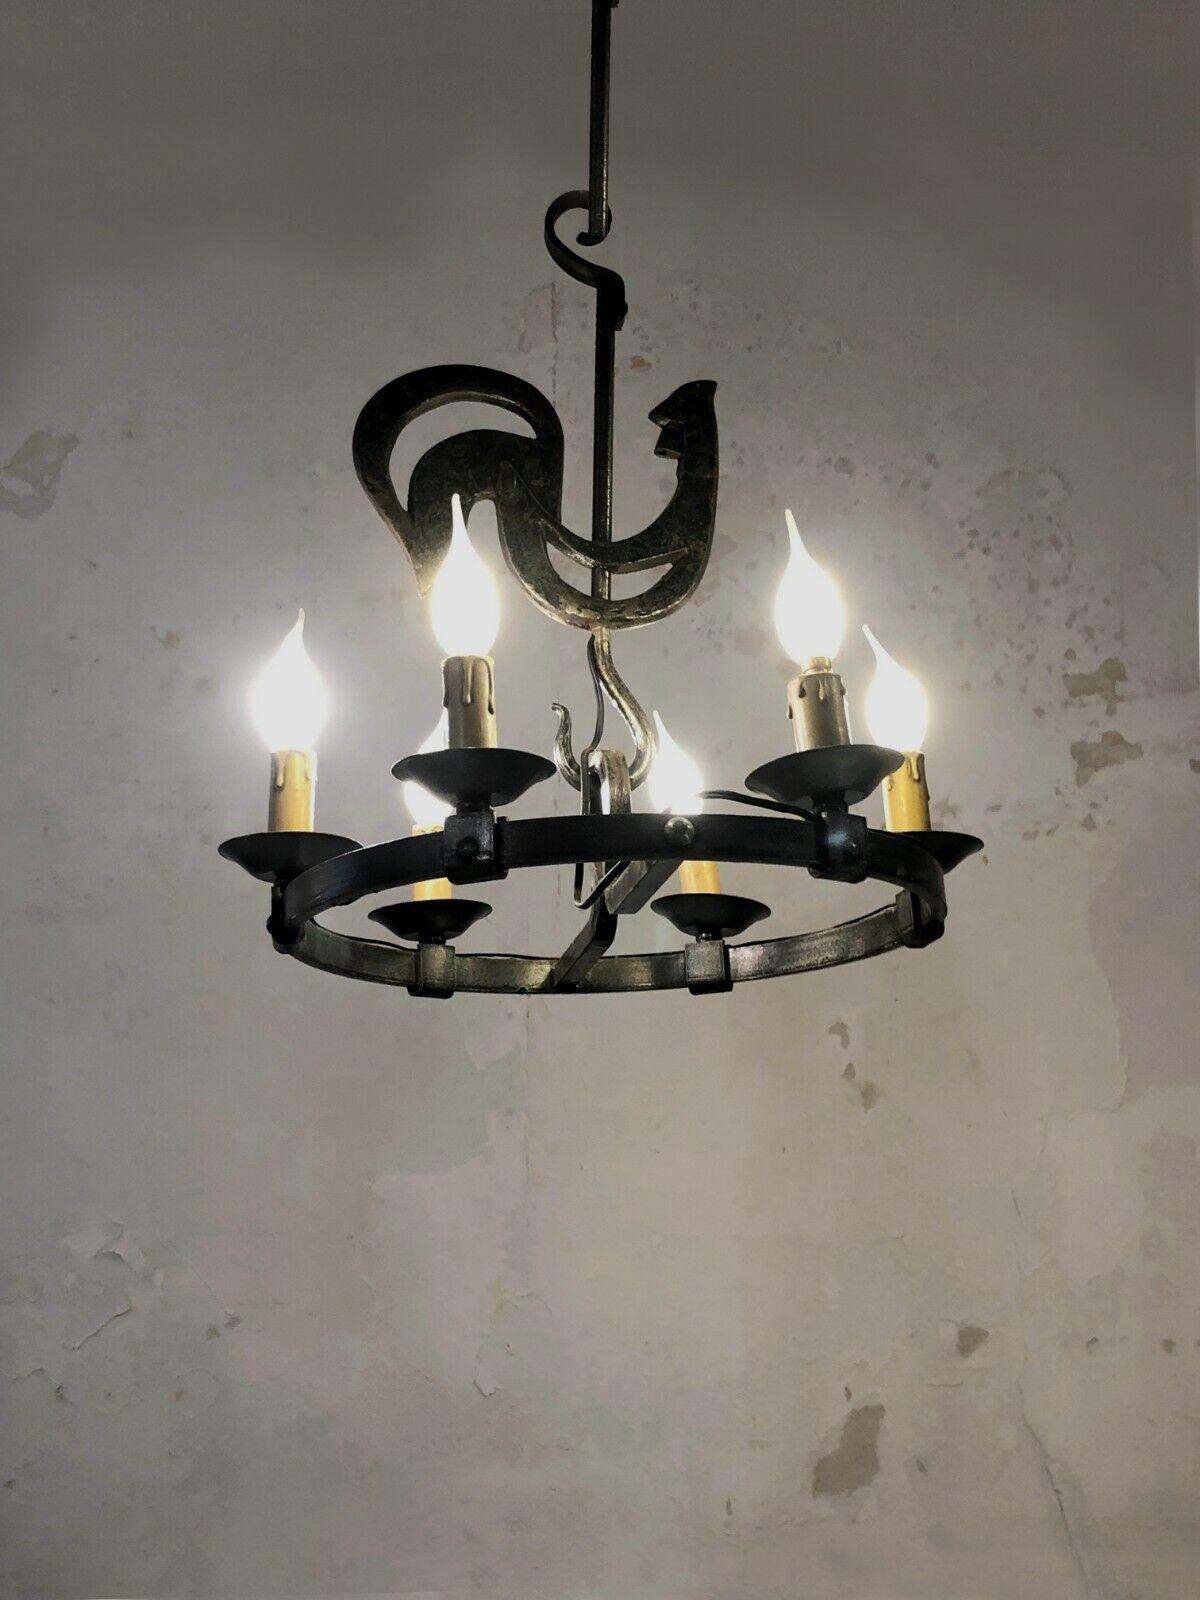 An impressive and sculptural circular rooster pendant light, Art-Popular, Brutalist, Rustic-Modern,  circular structure in solid hammered wrought iron, surrounded by 6 candle-style lights, in the spirit of the Artisans of Marolles, Jean Touret &